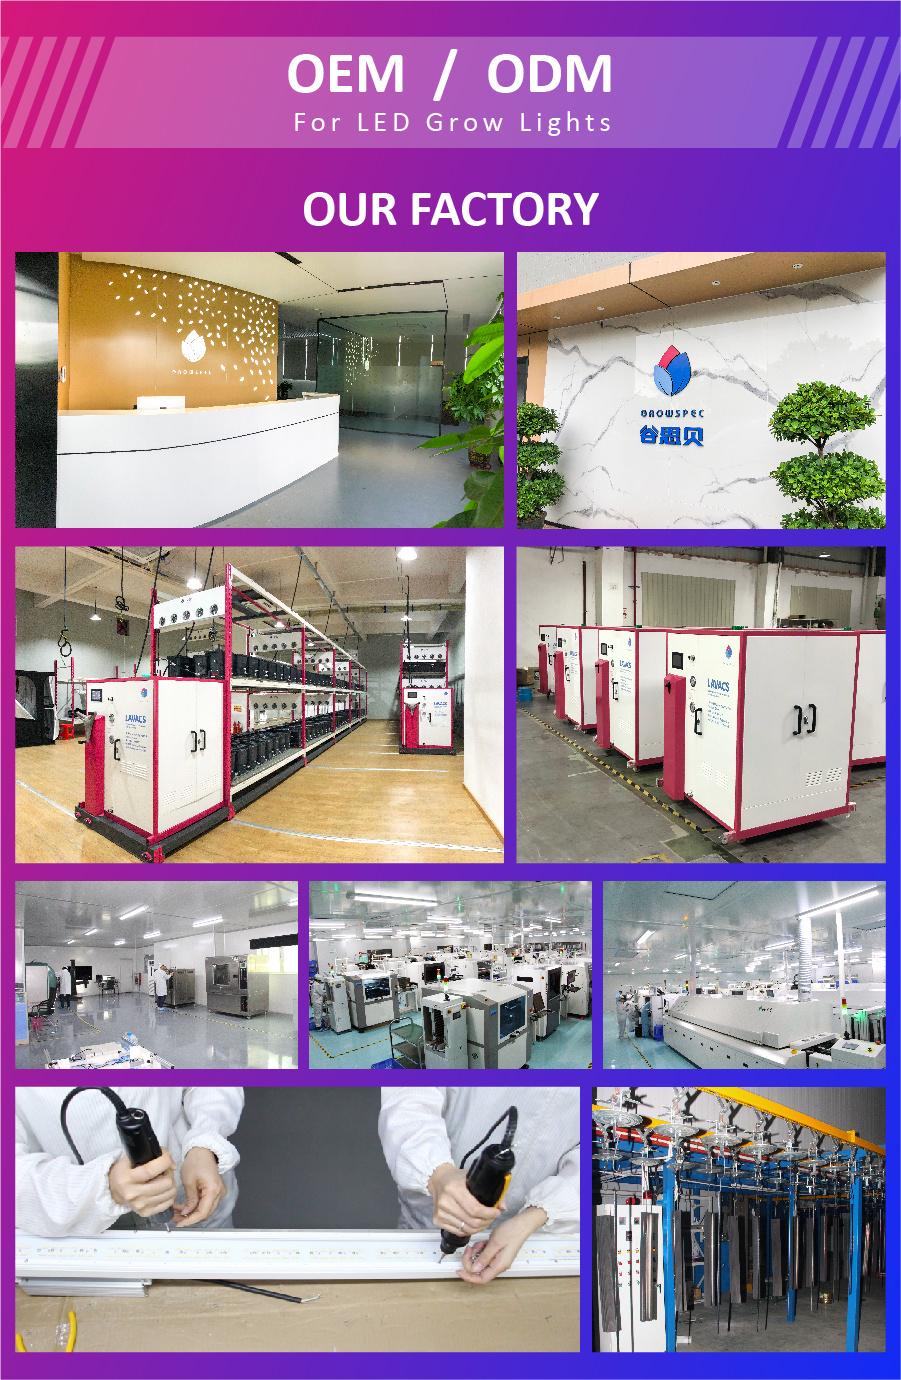 500W Lm301b LED Grow Light Manufacturers and Suppliers